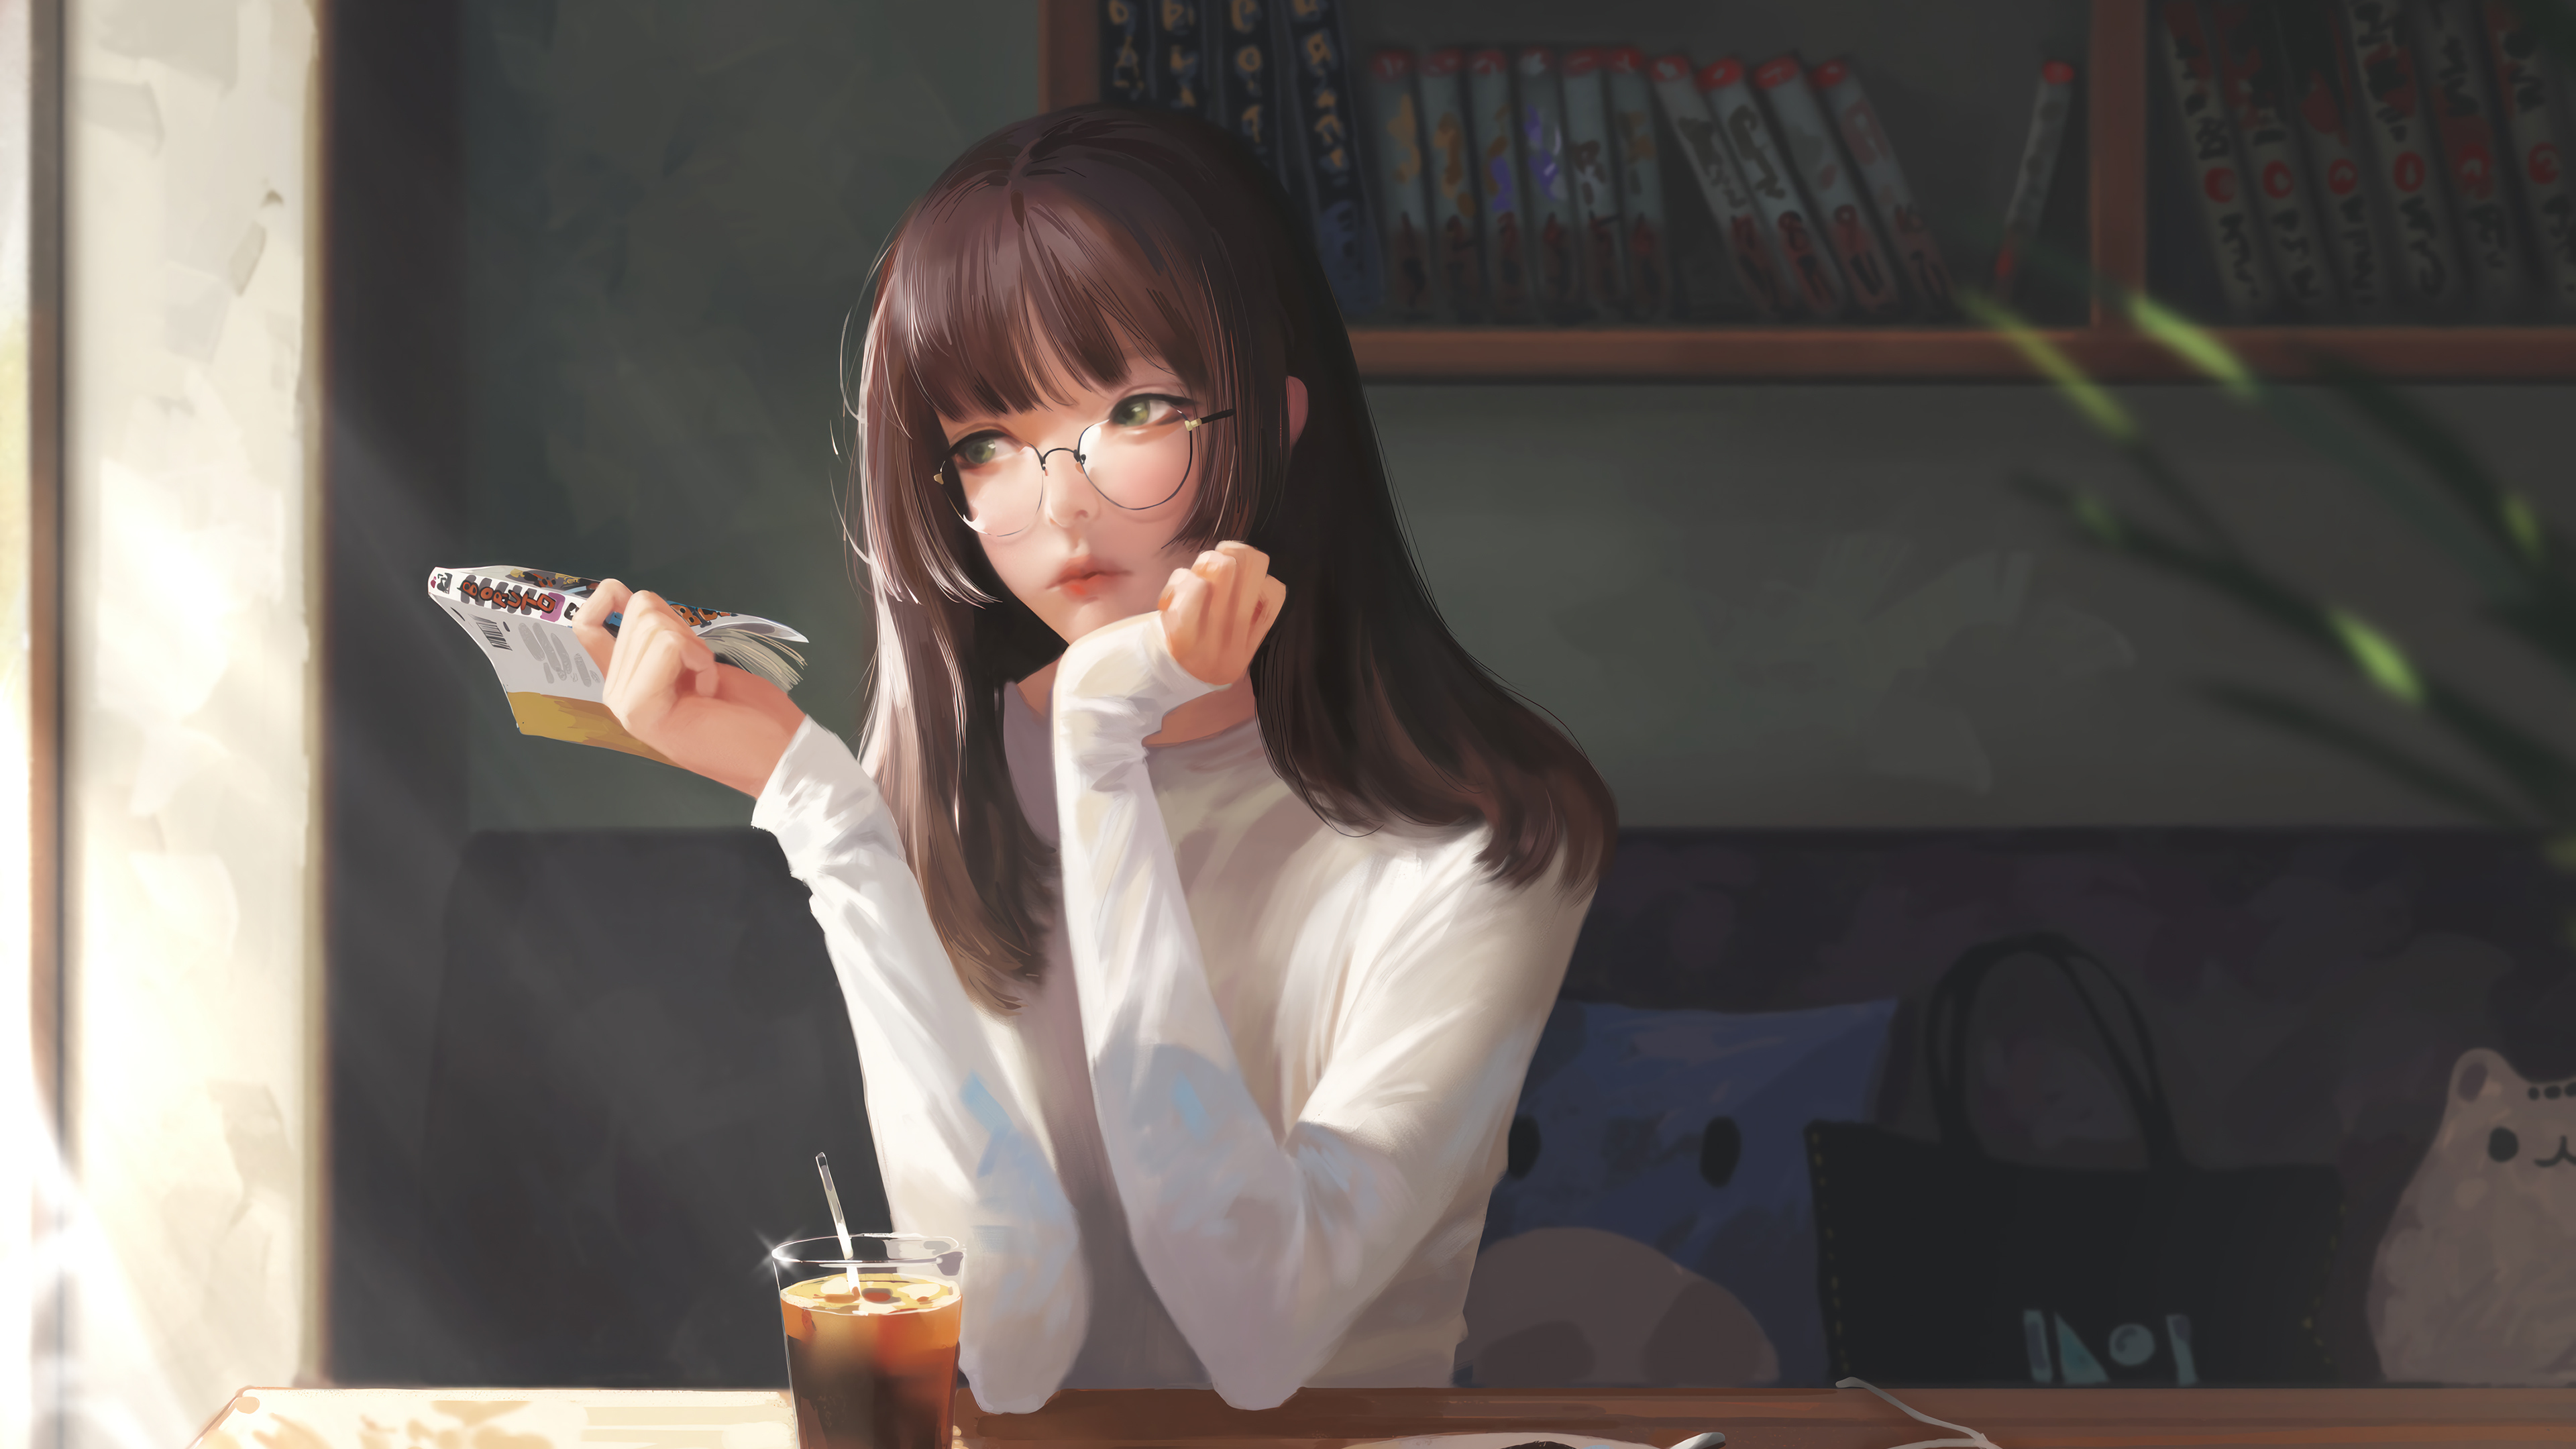 Original Characters Cafe Books Brunette Looking Away Glasses Anime Girls Drink 3840x2160